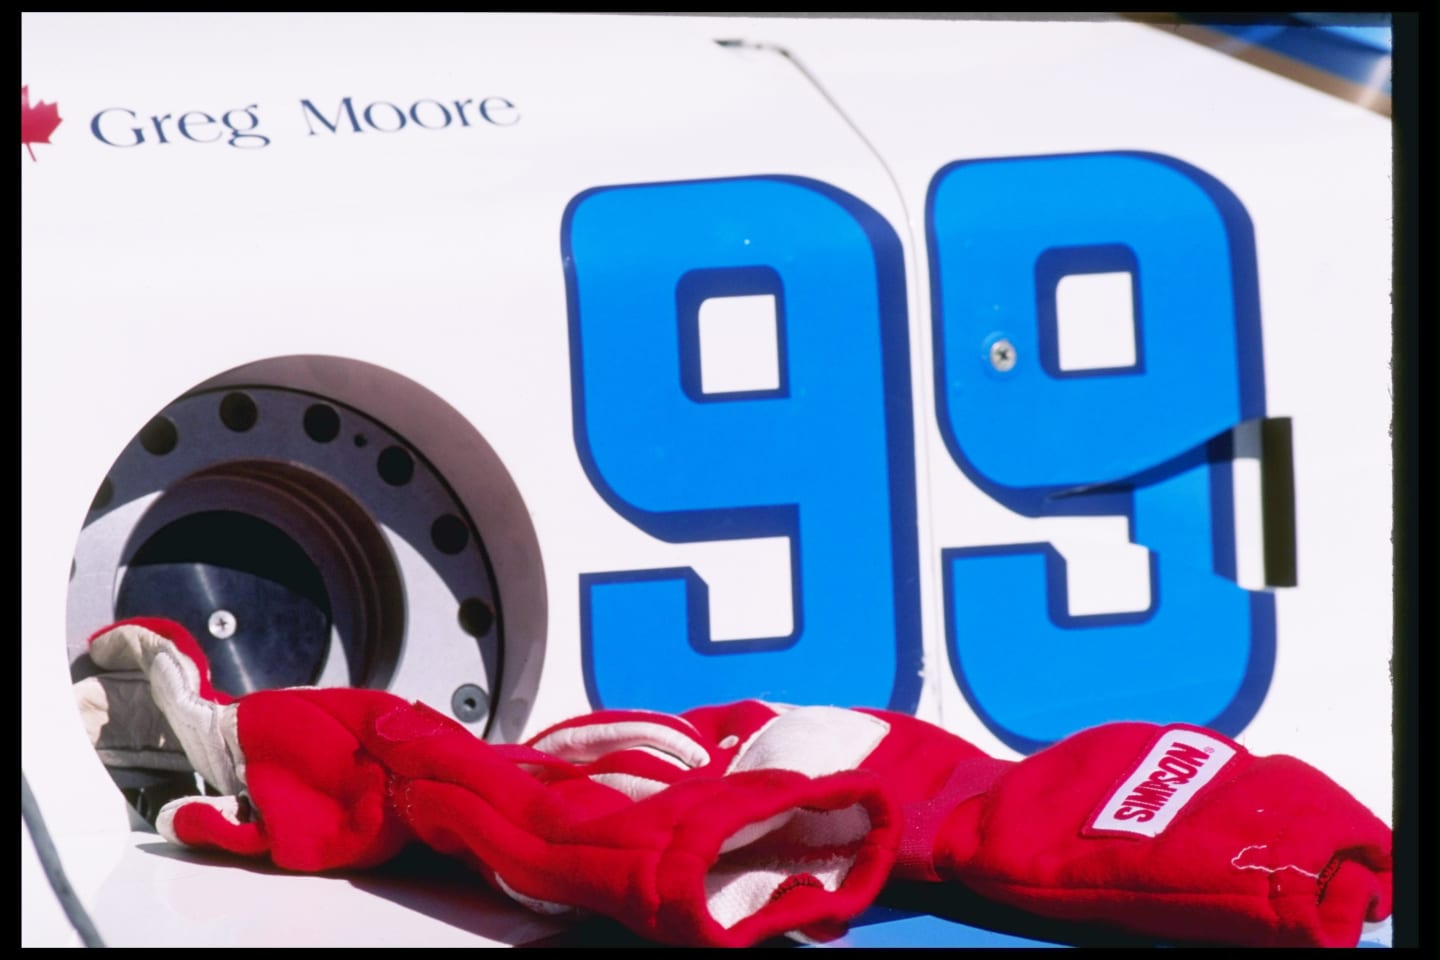 6 Apr 1997: Greg Moore of Canada shows off his Reynard Mercedes 971 for the Forsythe Racing Team at